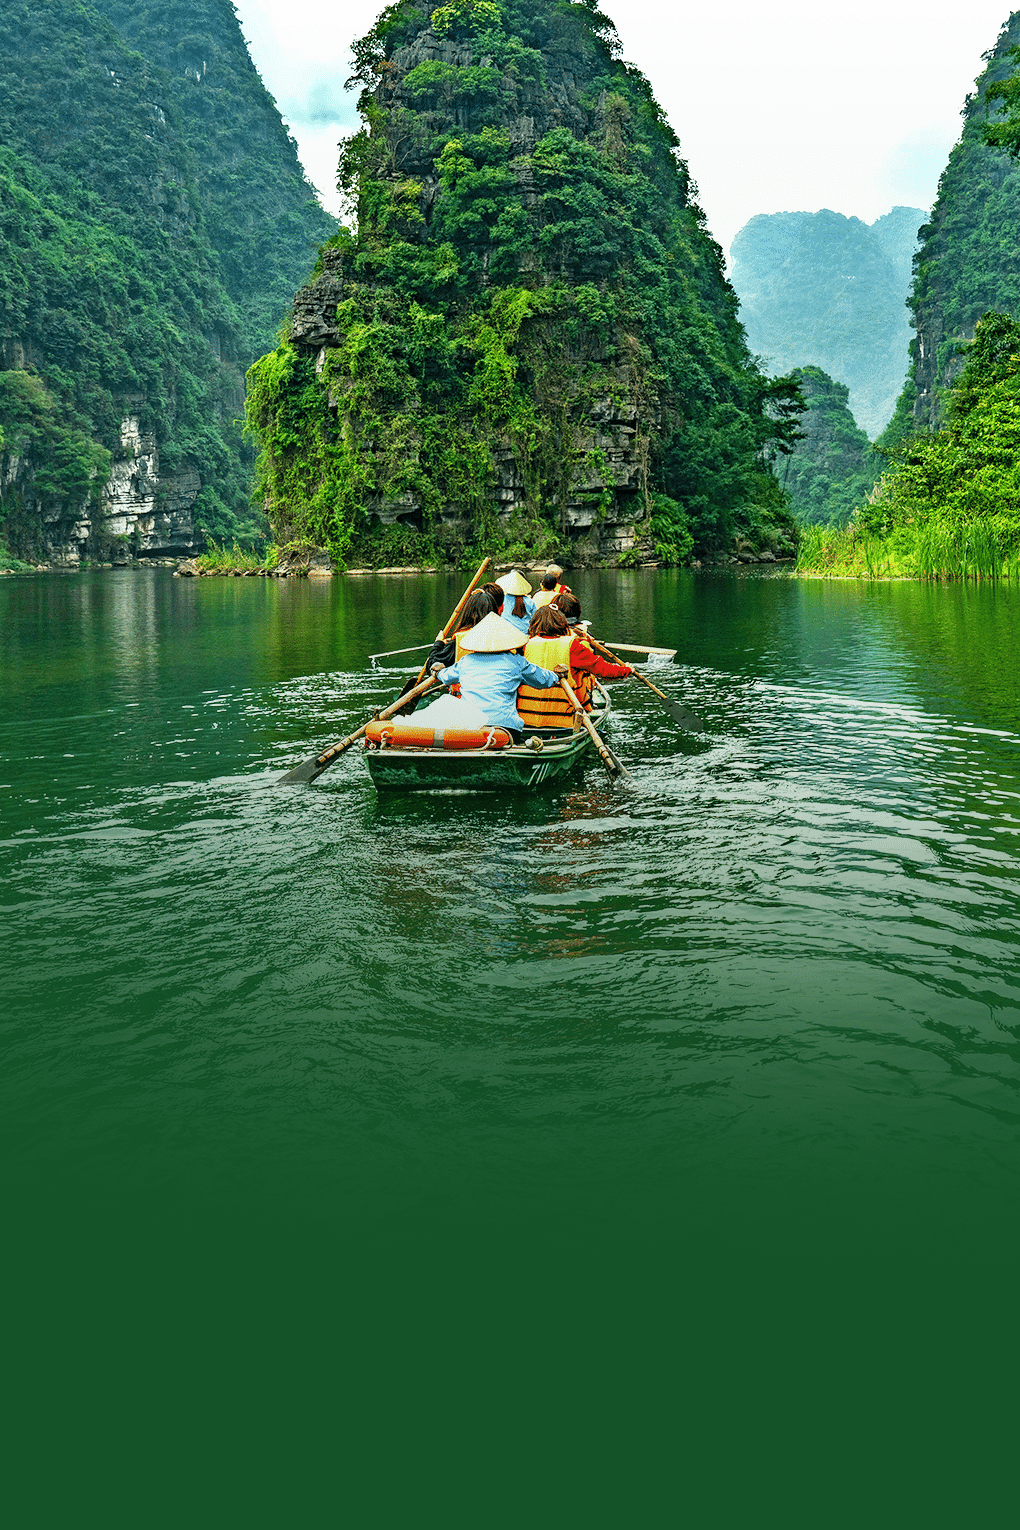 Escape to Vietnam with Boat Ride to Tam Coc Caves